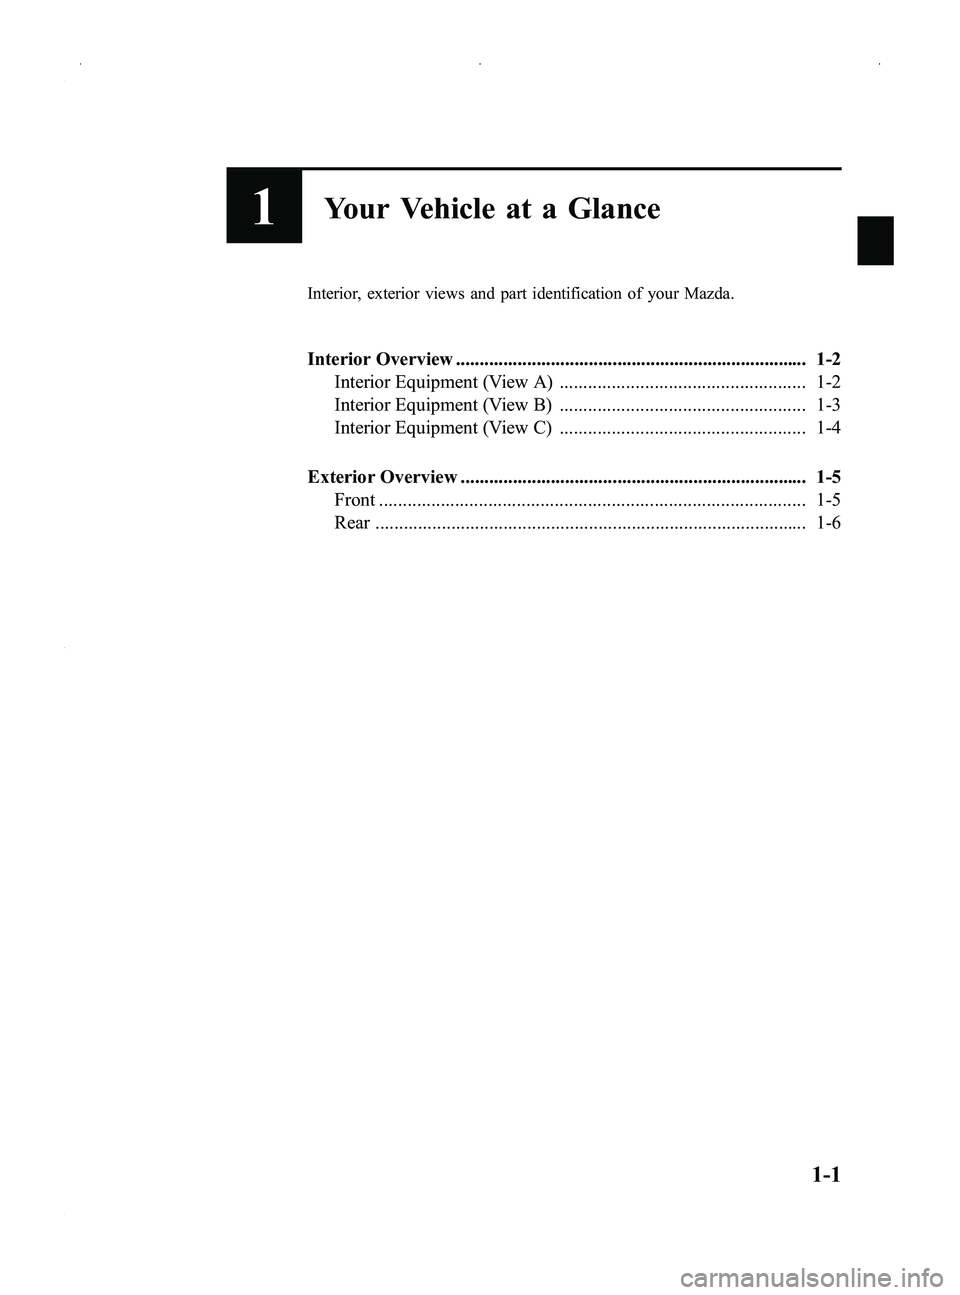 MAZDA MODEL MX-5 MIATA 2014  Owners Manual Black plate (7,1)
1Your Vehicle at a Glance
Interior, exterior views and part identification of your Mazda.
Interior Overview ..........................................................................